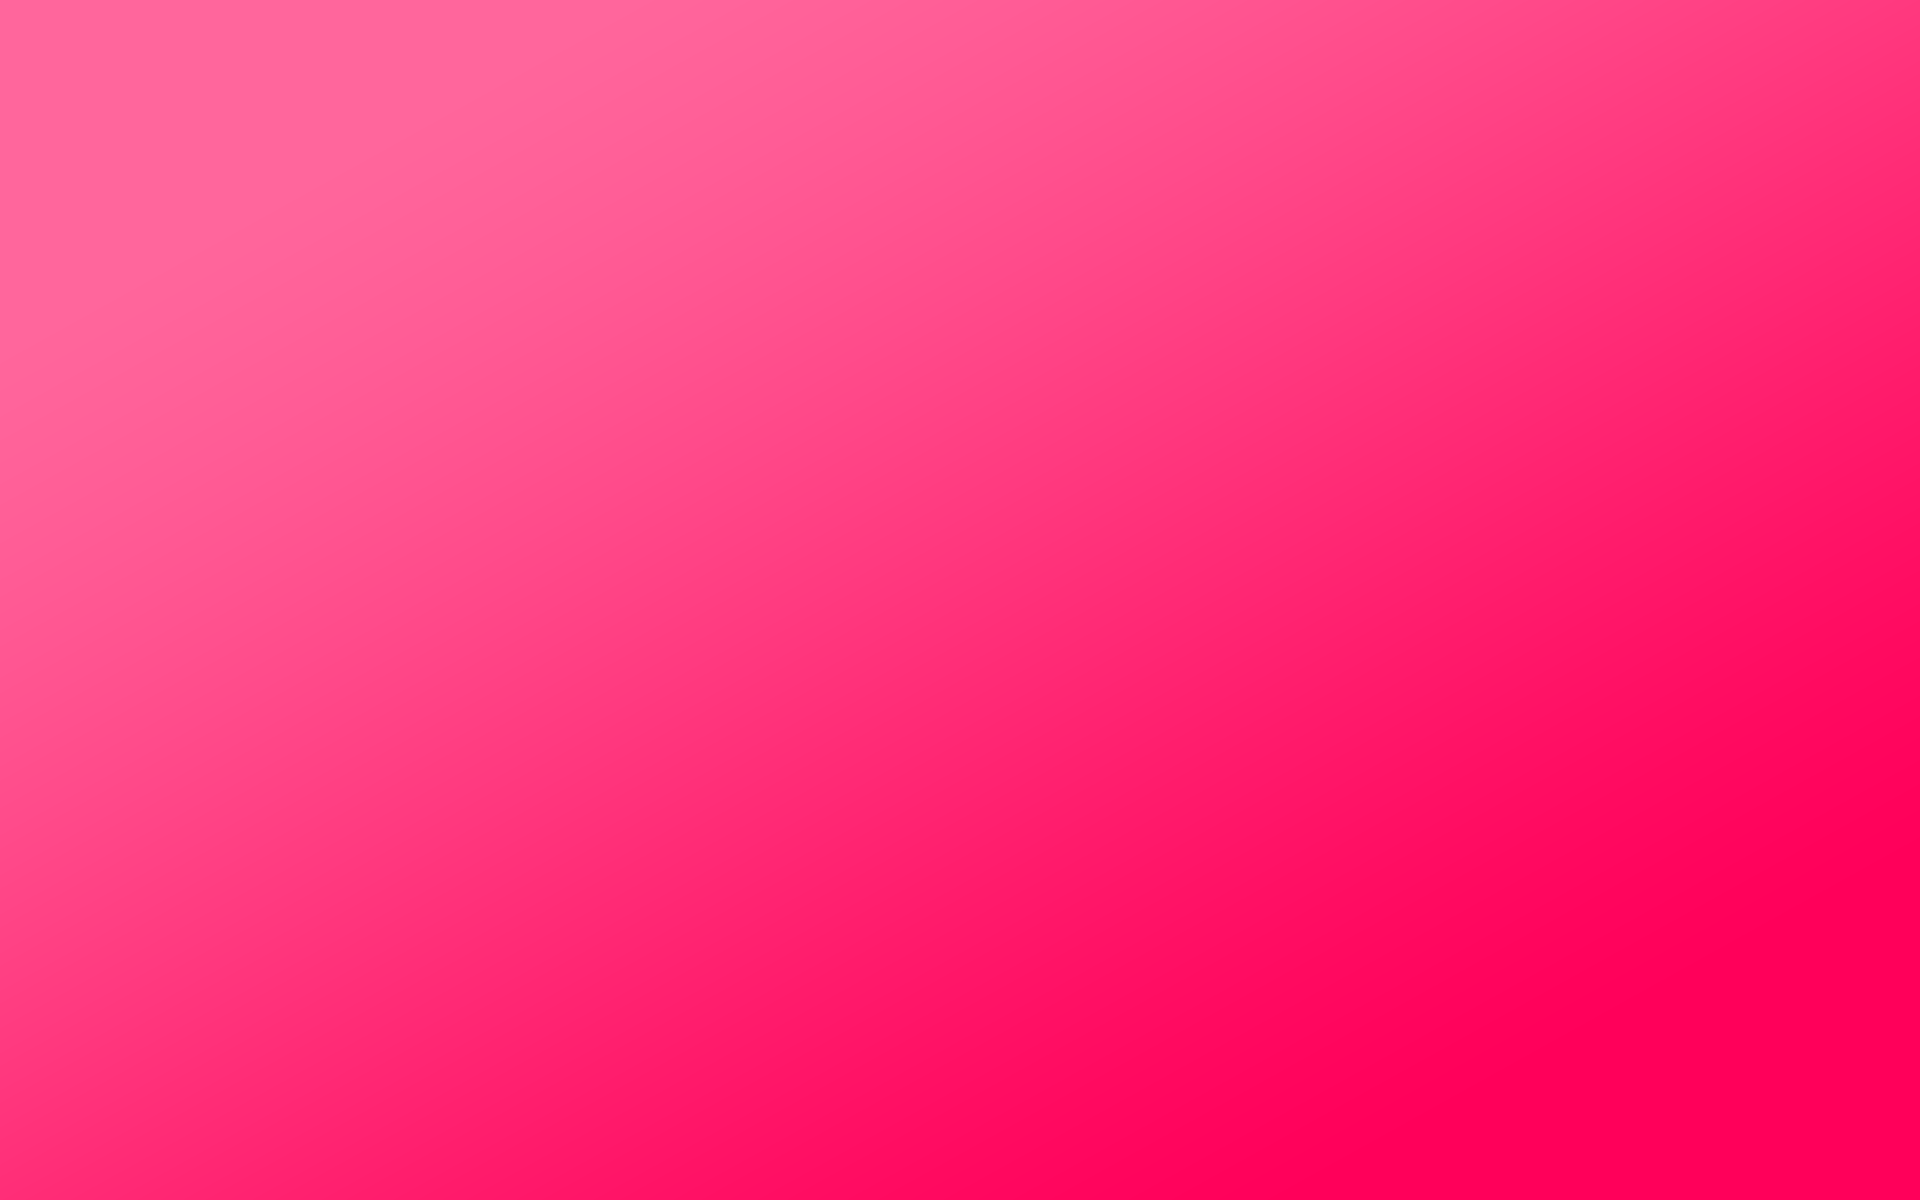 Pink Background Abstract HD Wallpaper X. Free Image